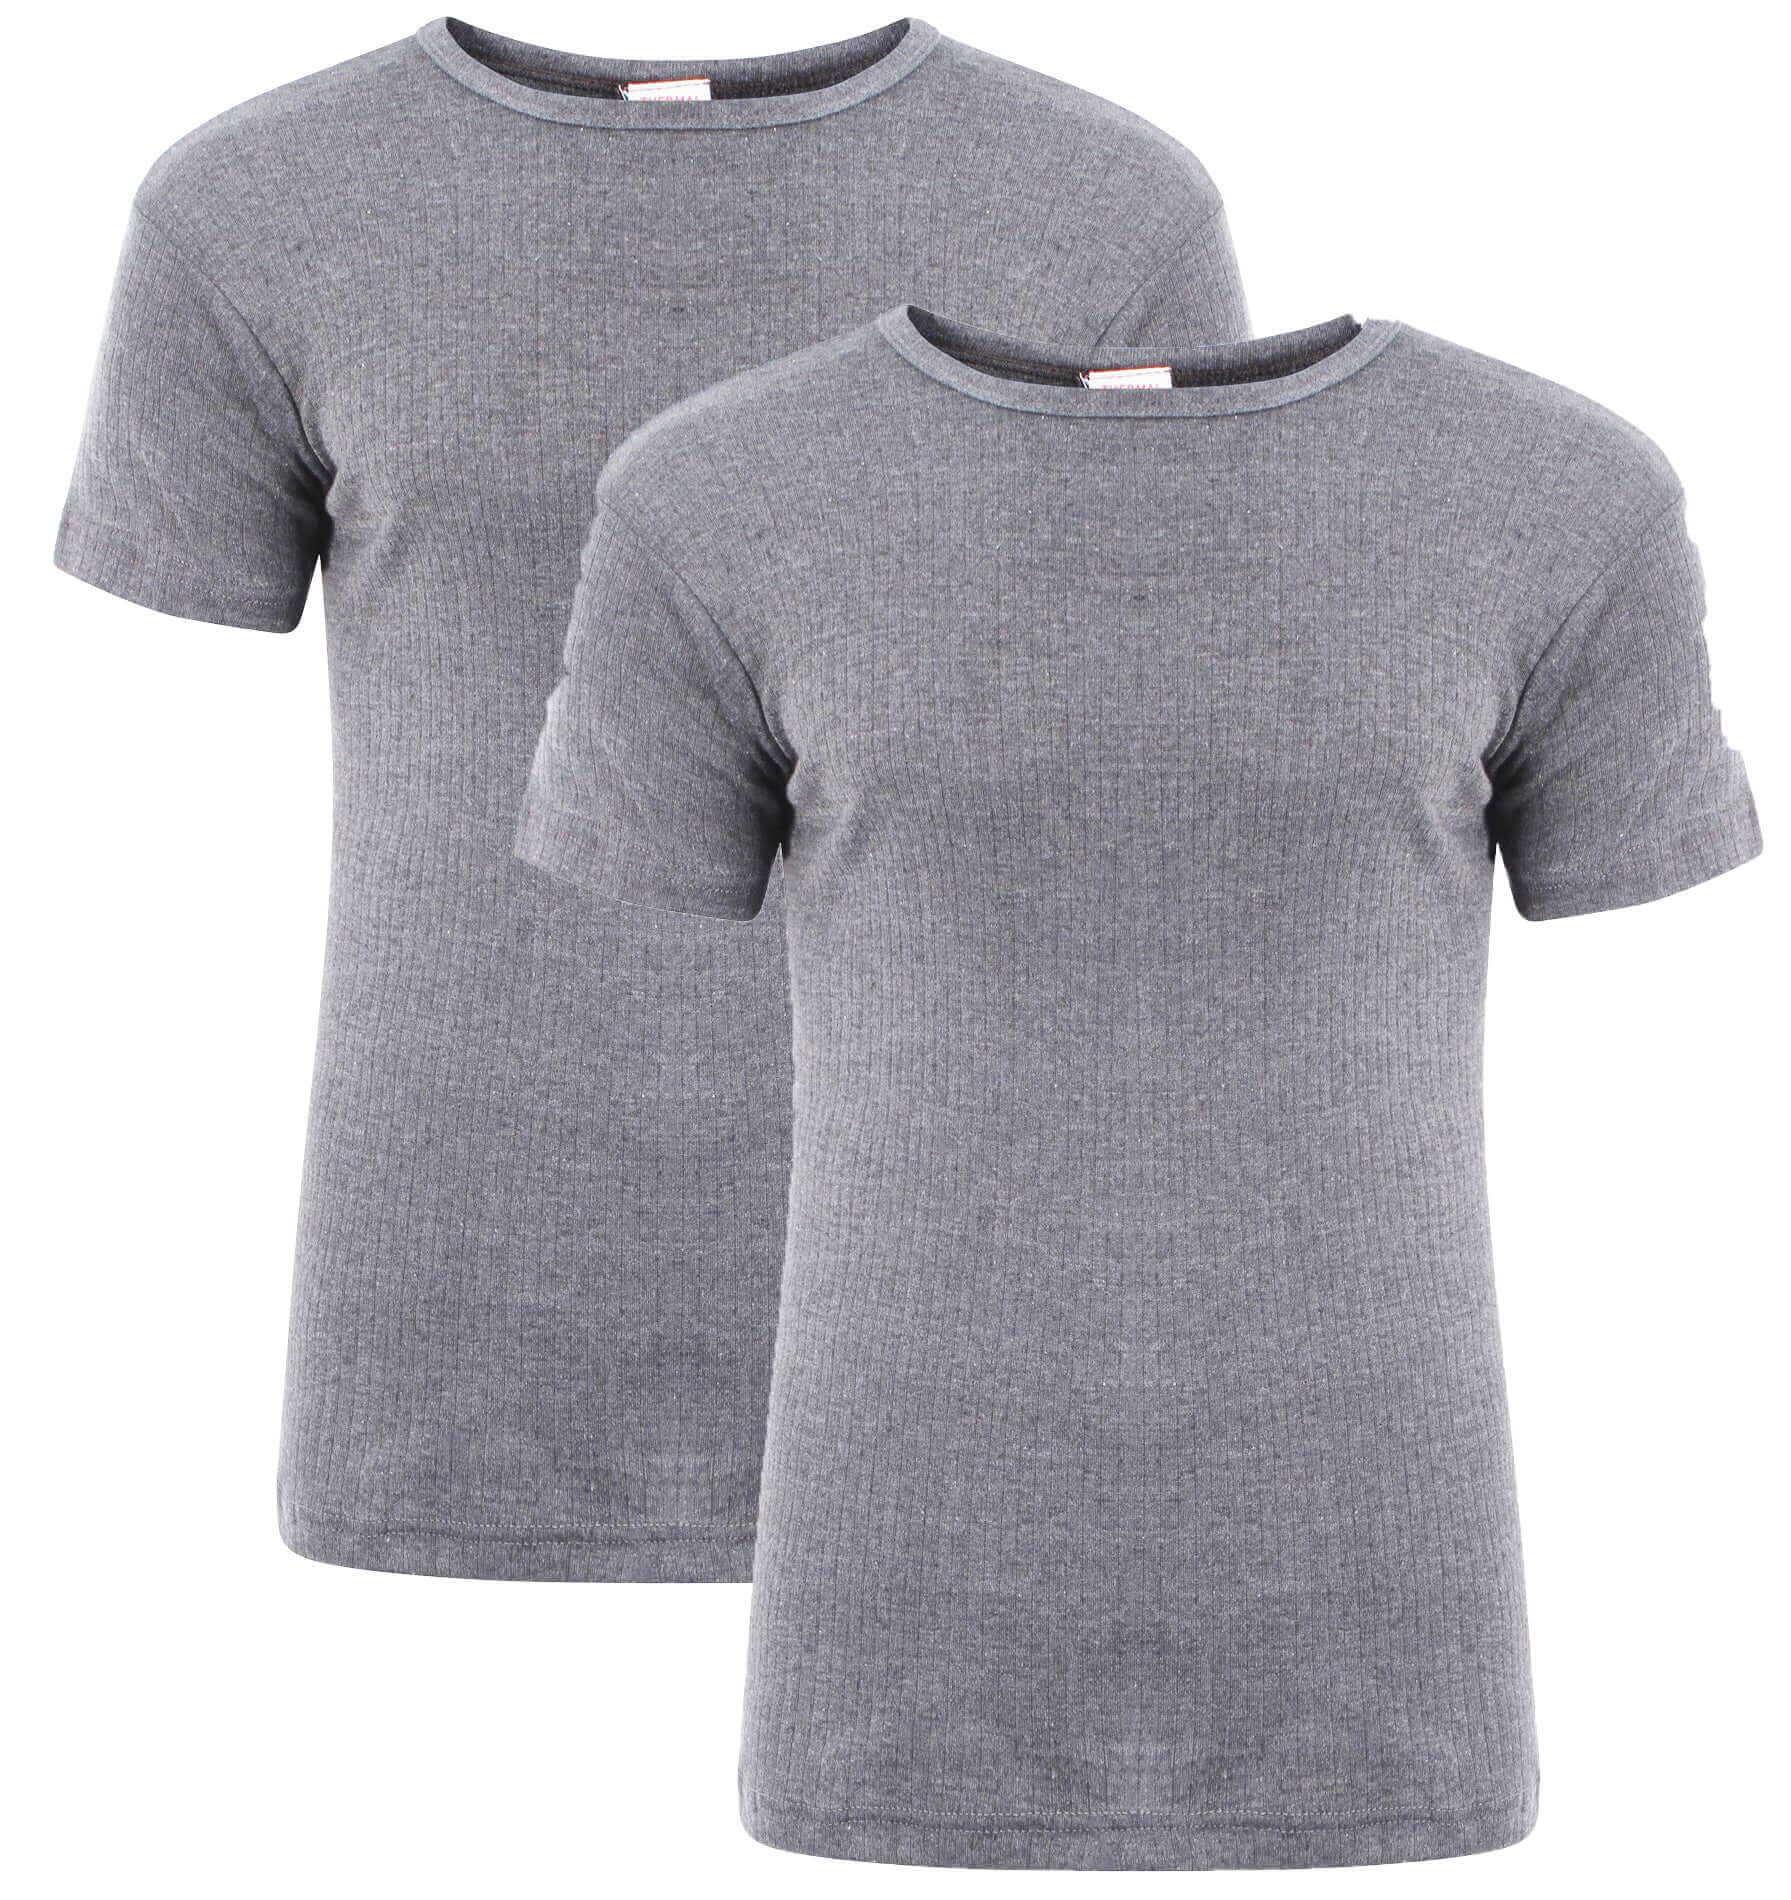 Heatwave® Pack Of 2 Men's Thermal T Shirt, Warm Underwear Baselayer. Buy now for £10.00. A Thermal Underwear by Heatwave Thermalwear. baselayer, black, blue, charcoal, grey, heatwave, hiking, large, long johns, long sleeve, marl grey, medium, mens, navy,